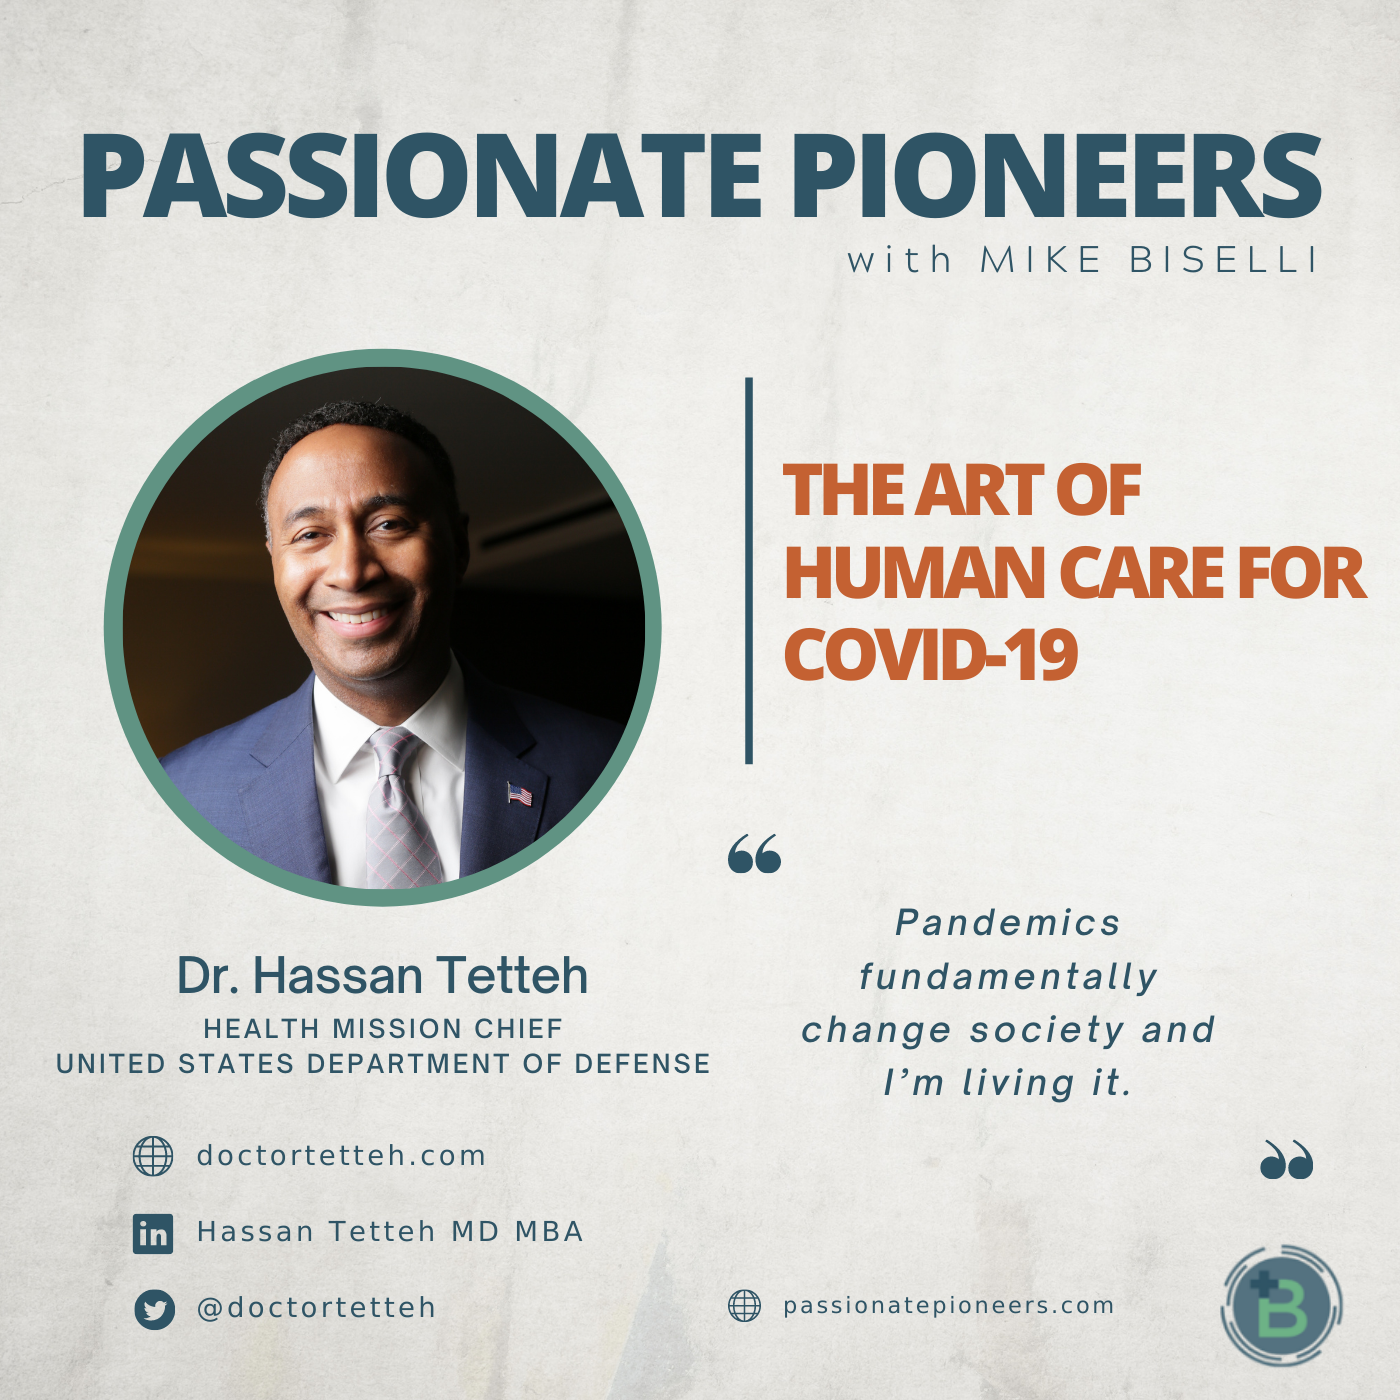 The Art of Human Care for COVID-19 with Dr. Hassan Tetteh